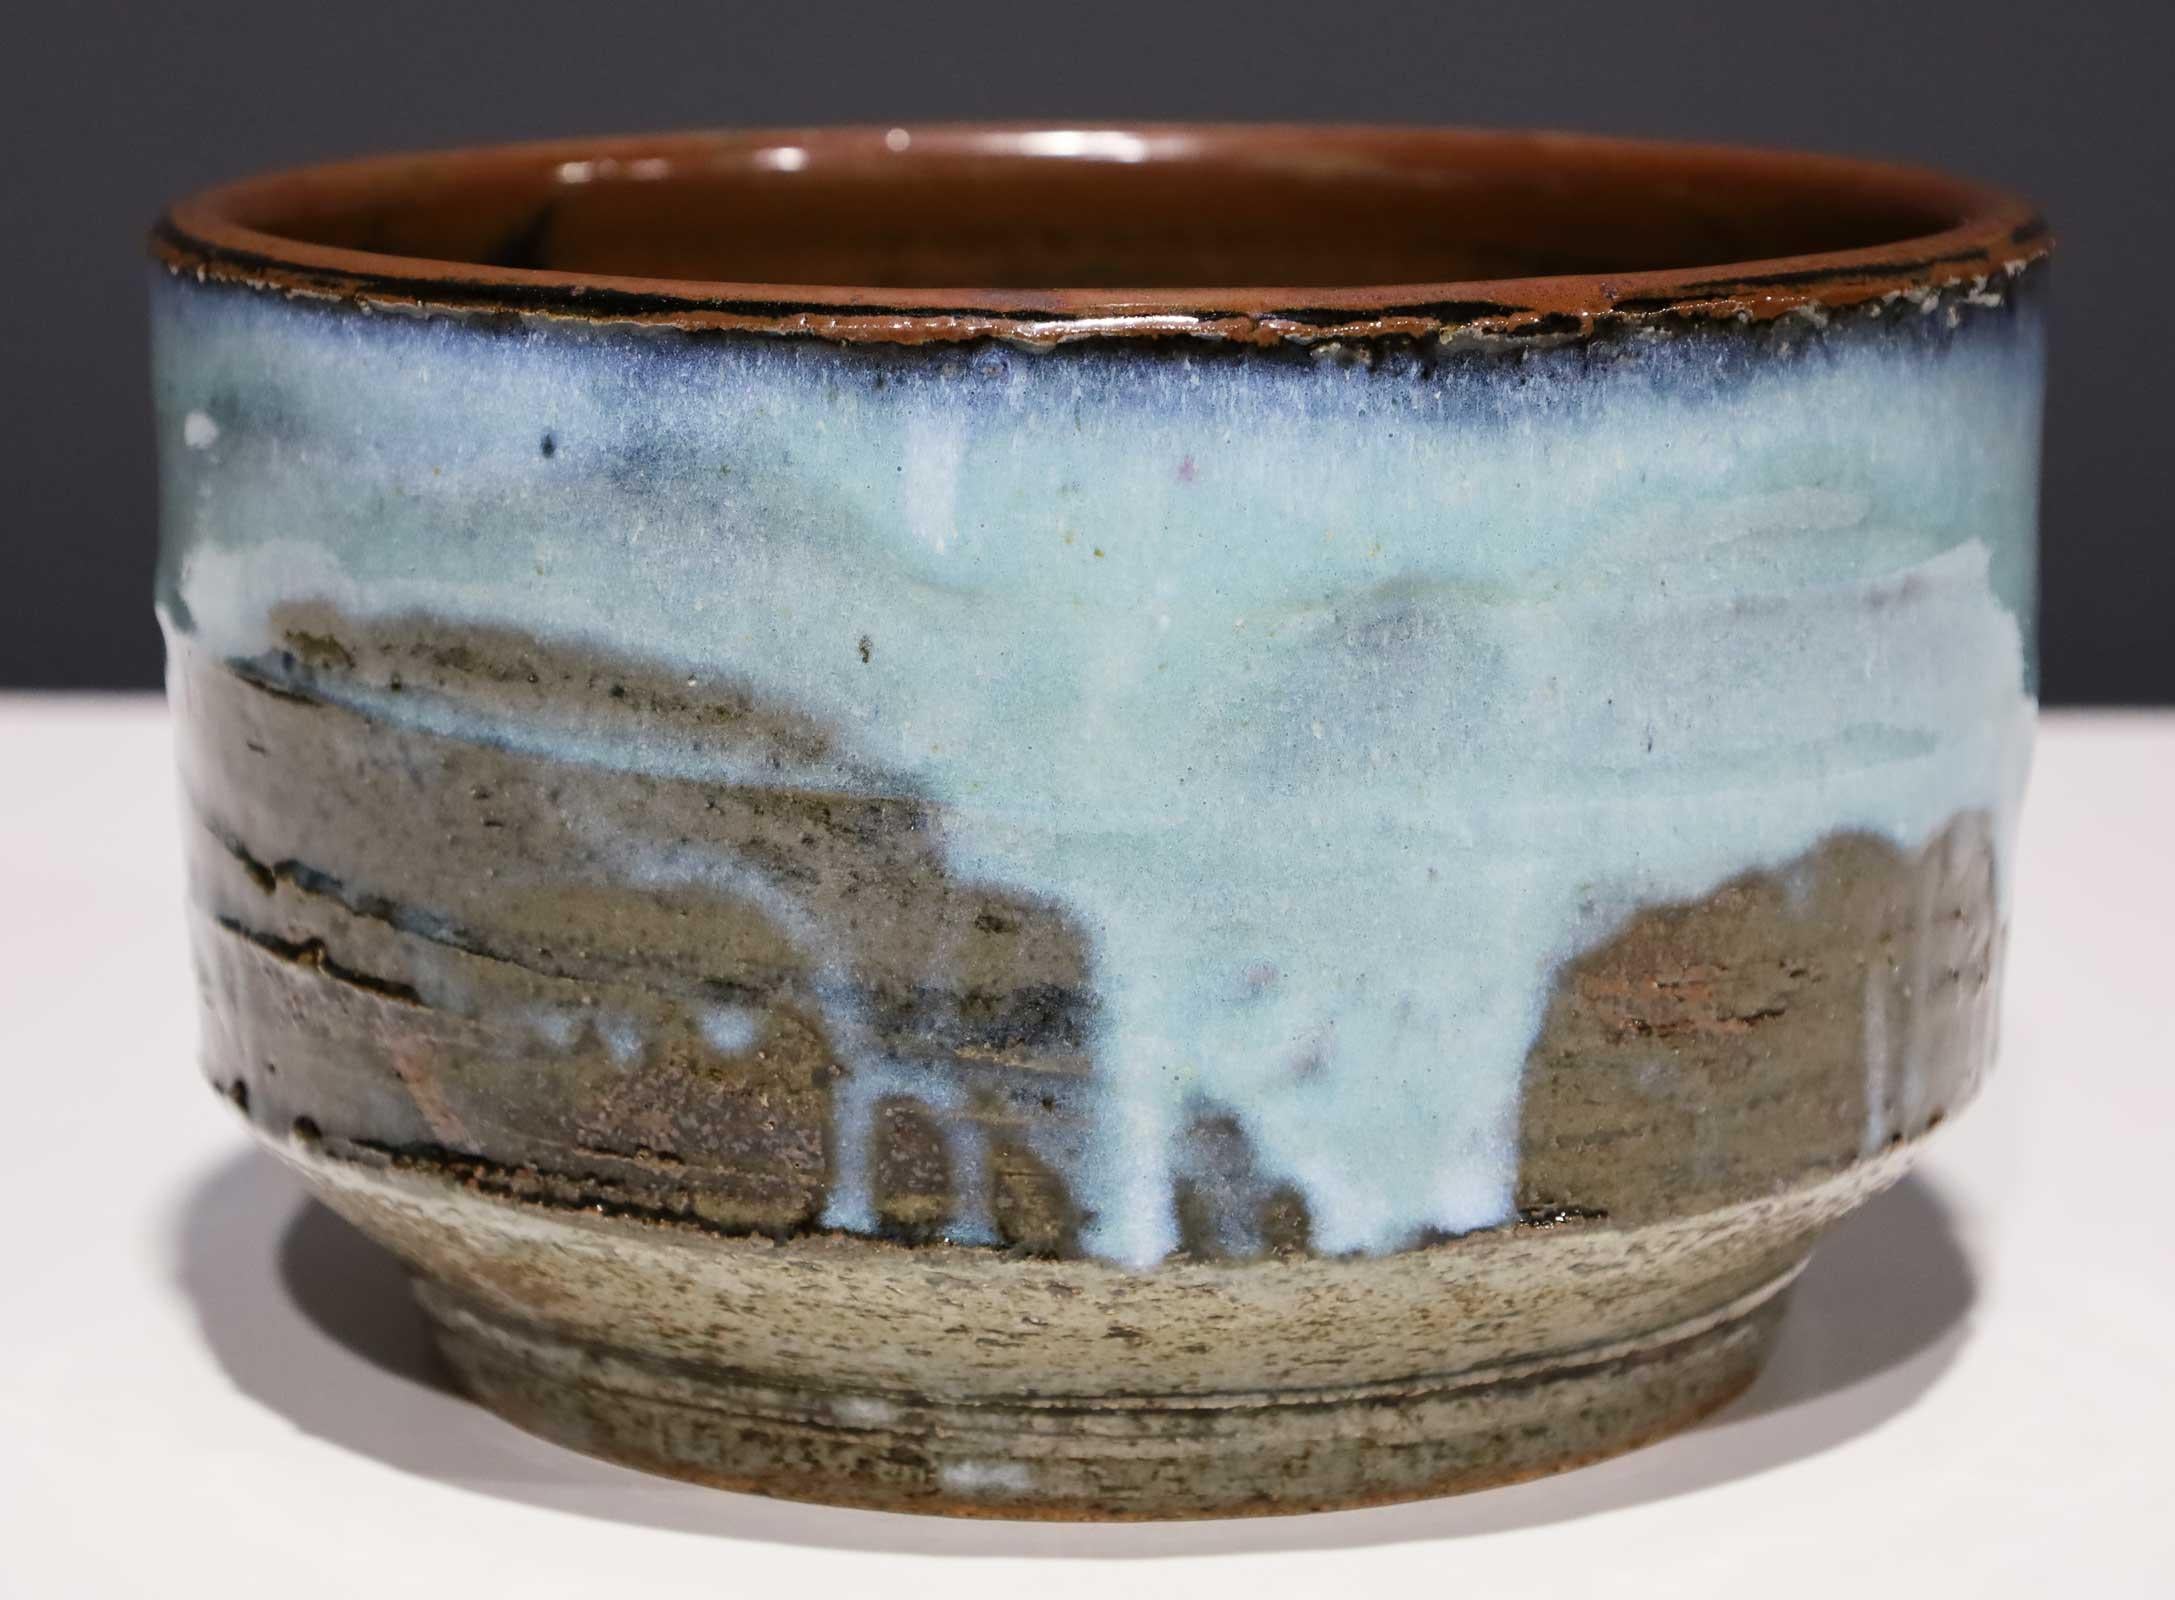 A potter and painter, Albert Green (1914-1994) earned an international reputation for his ceramics, stoneware, and canvases. A graduate of the University of Pennsylvania, he studied painting at the Art Students League in New York City, supporting